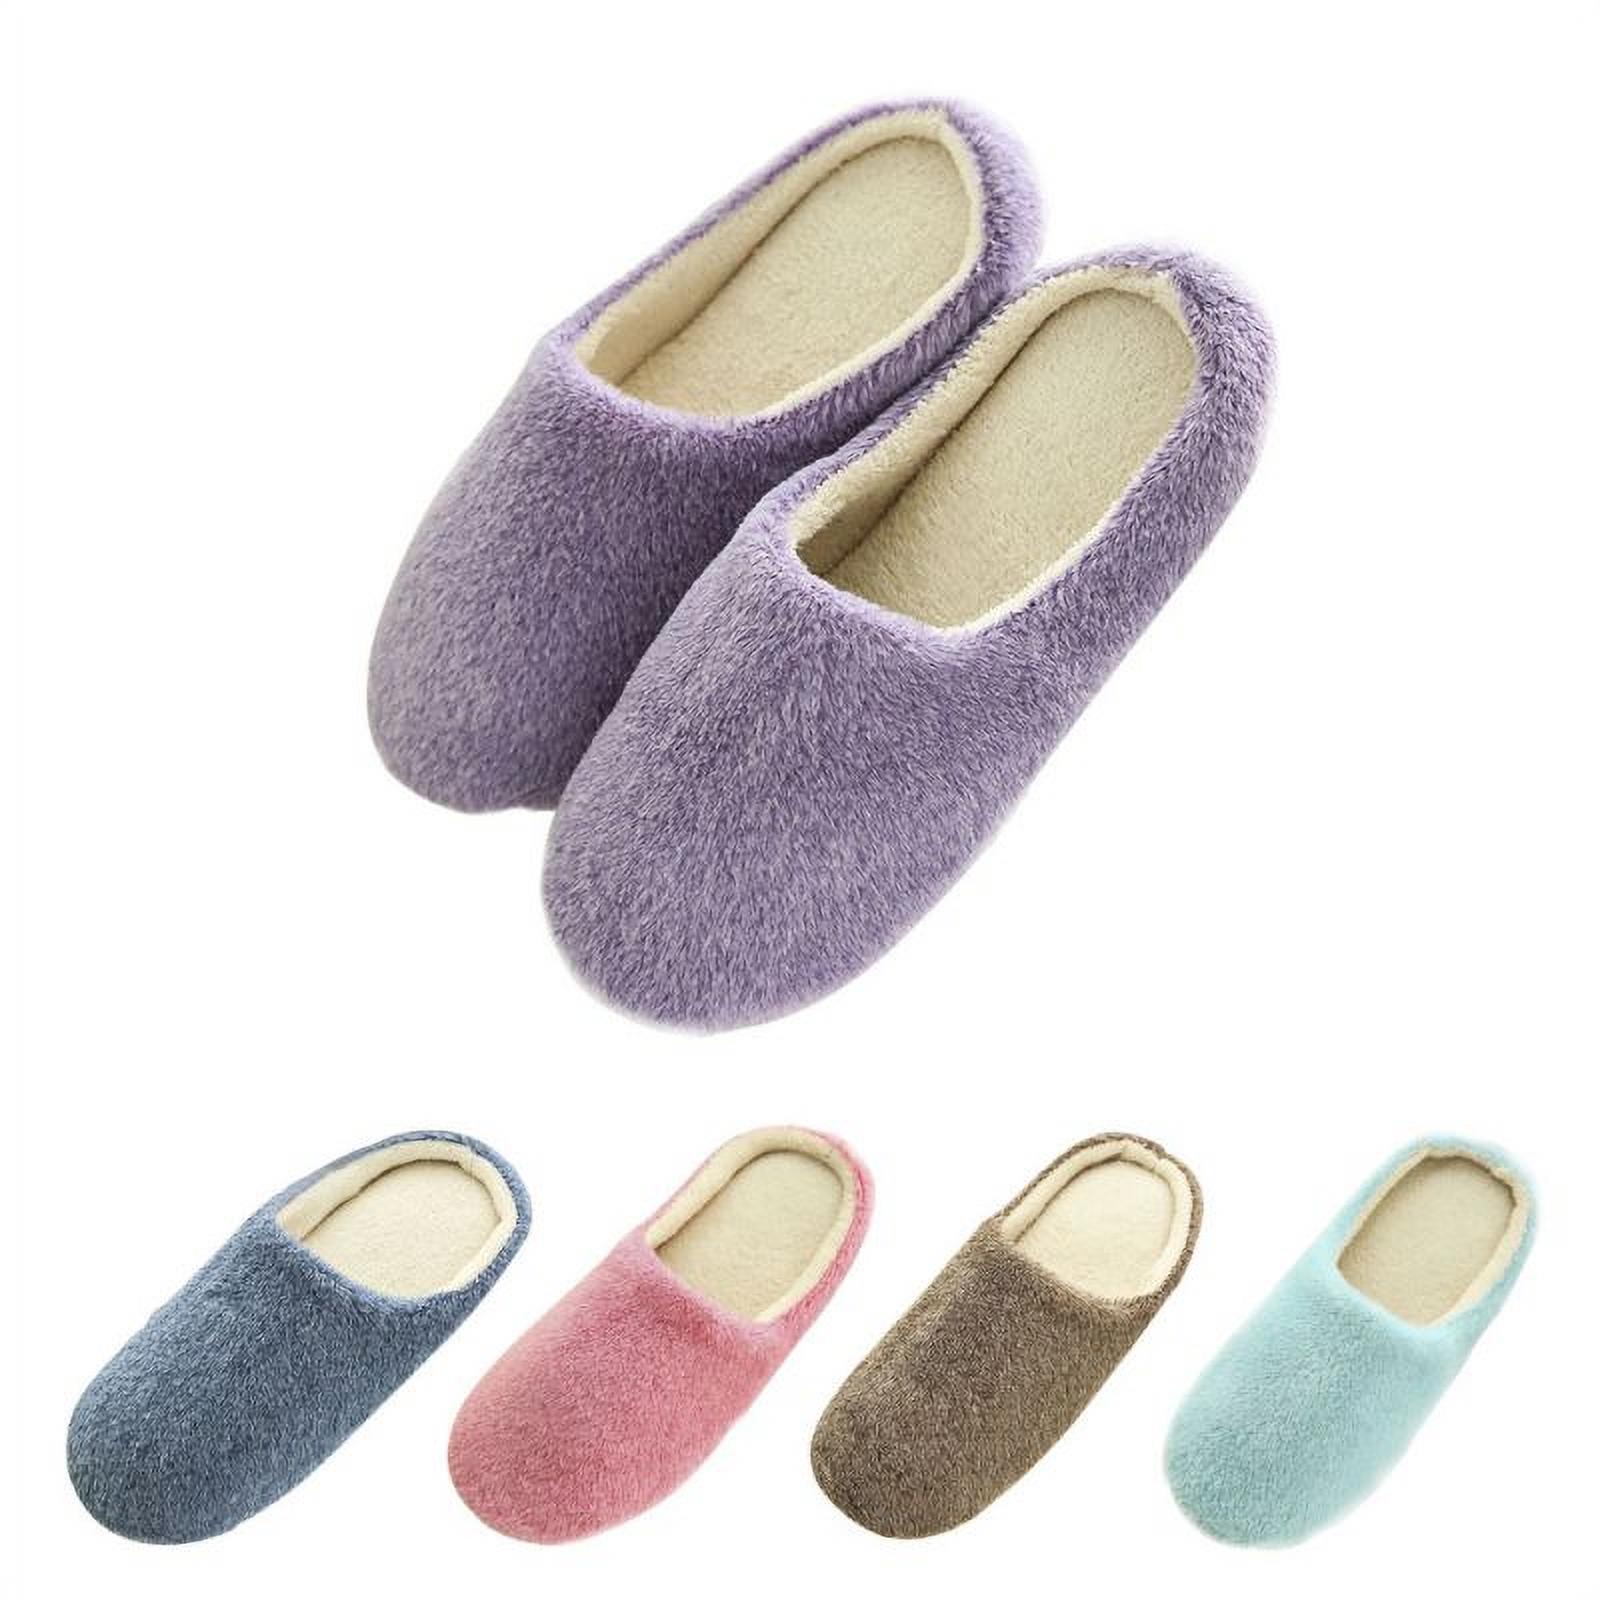 Clearance Women Men Winter Warm Fleece Anti-Slip Slippers Indoor House Shoes Lovers Home Floor Slippers Shoes - image 3 of 5